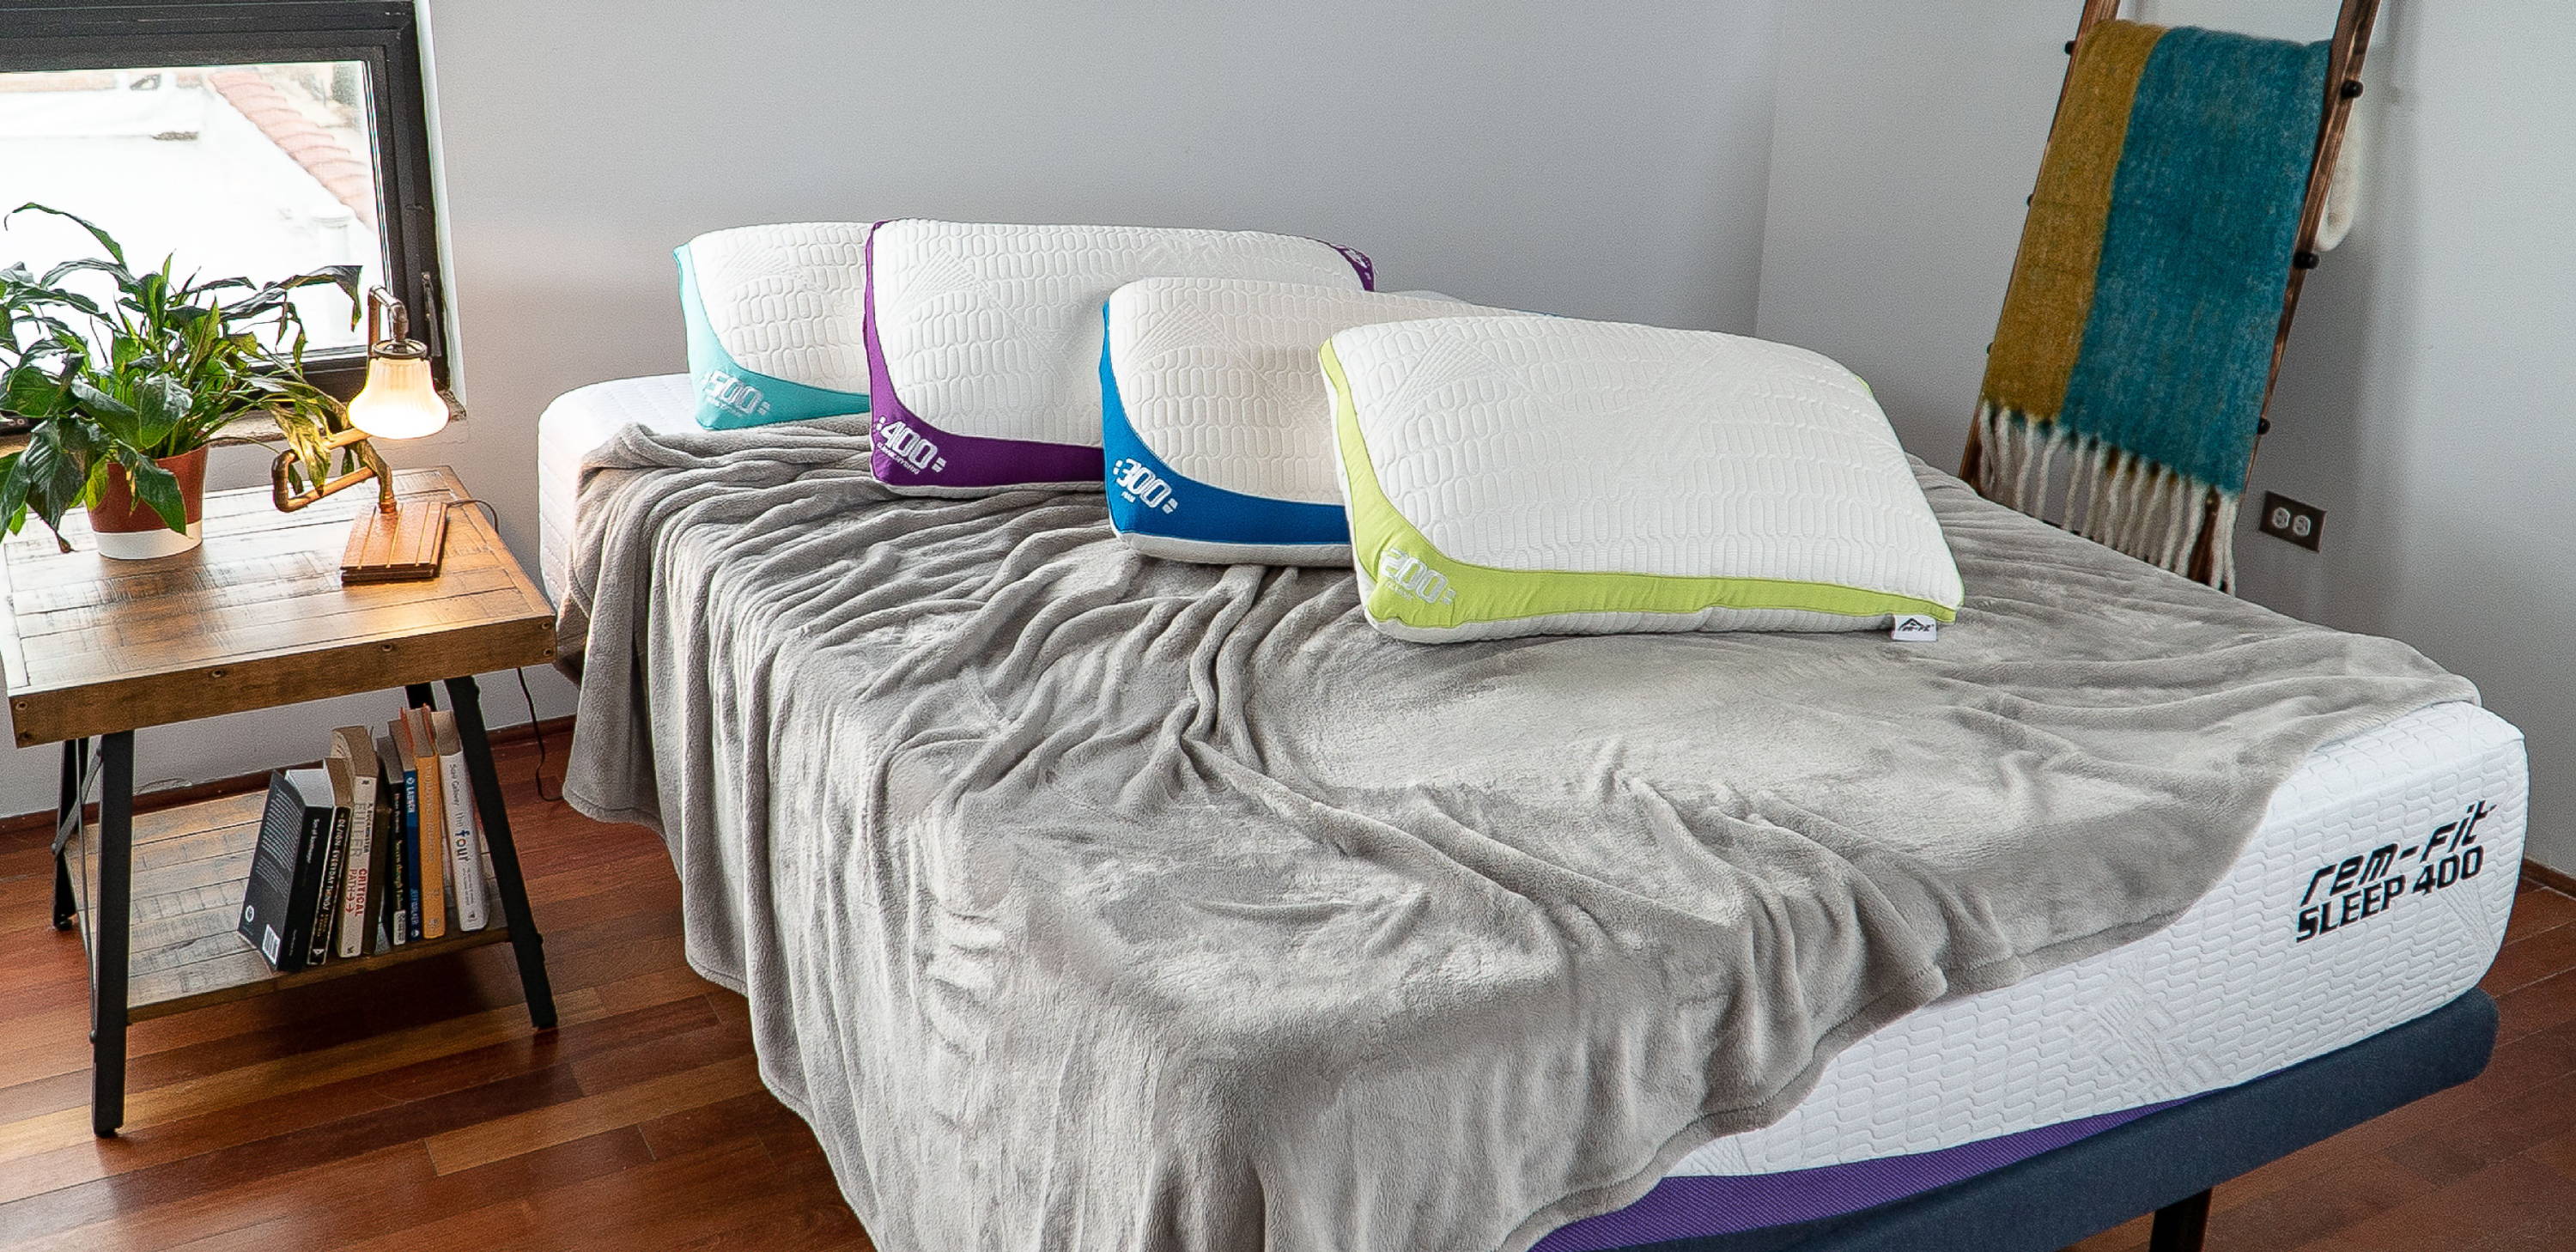 Sleep Calculator - Master your sleep cycles for the best recovery. cooling pillows on advanced memory foam mattress